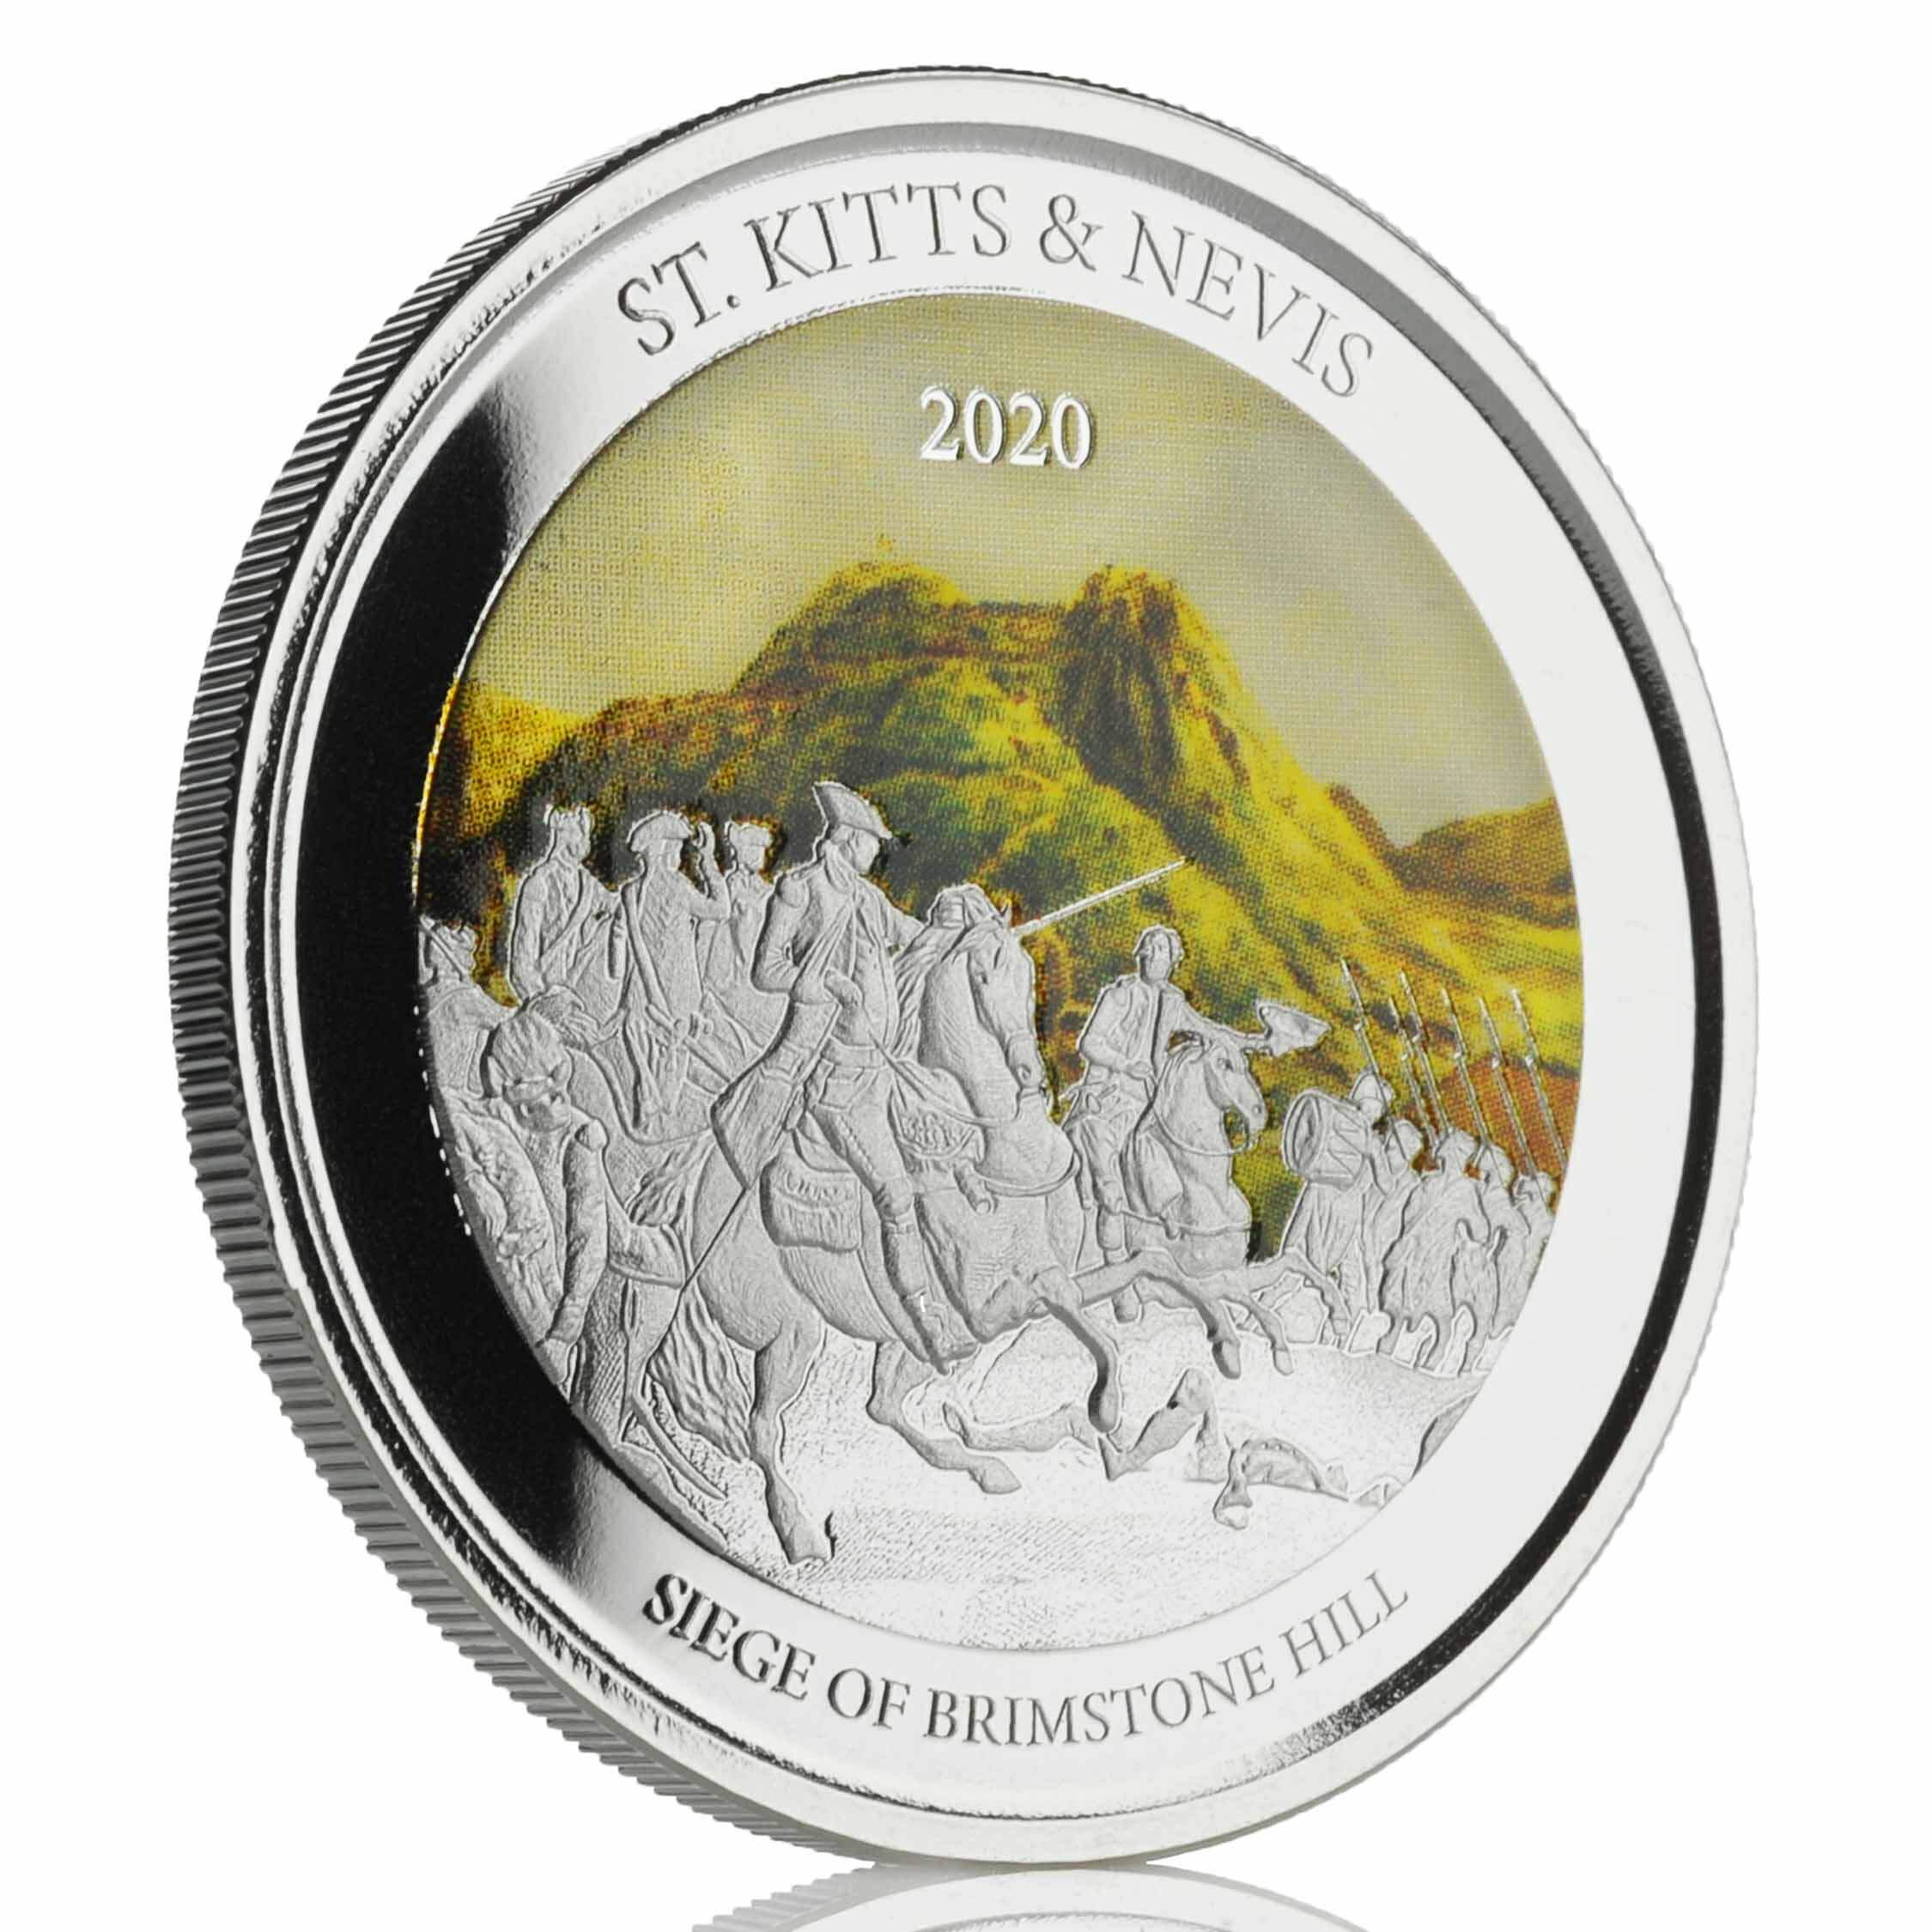 2020 Ec8 St. Kitts & Nevis "siege Of Brimstone Hill" 1 Oz Silver Color Coin